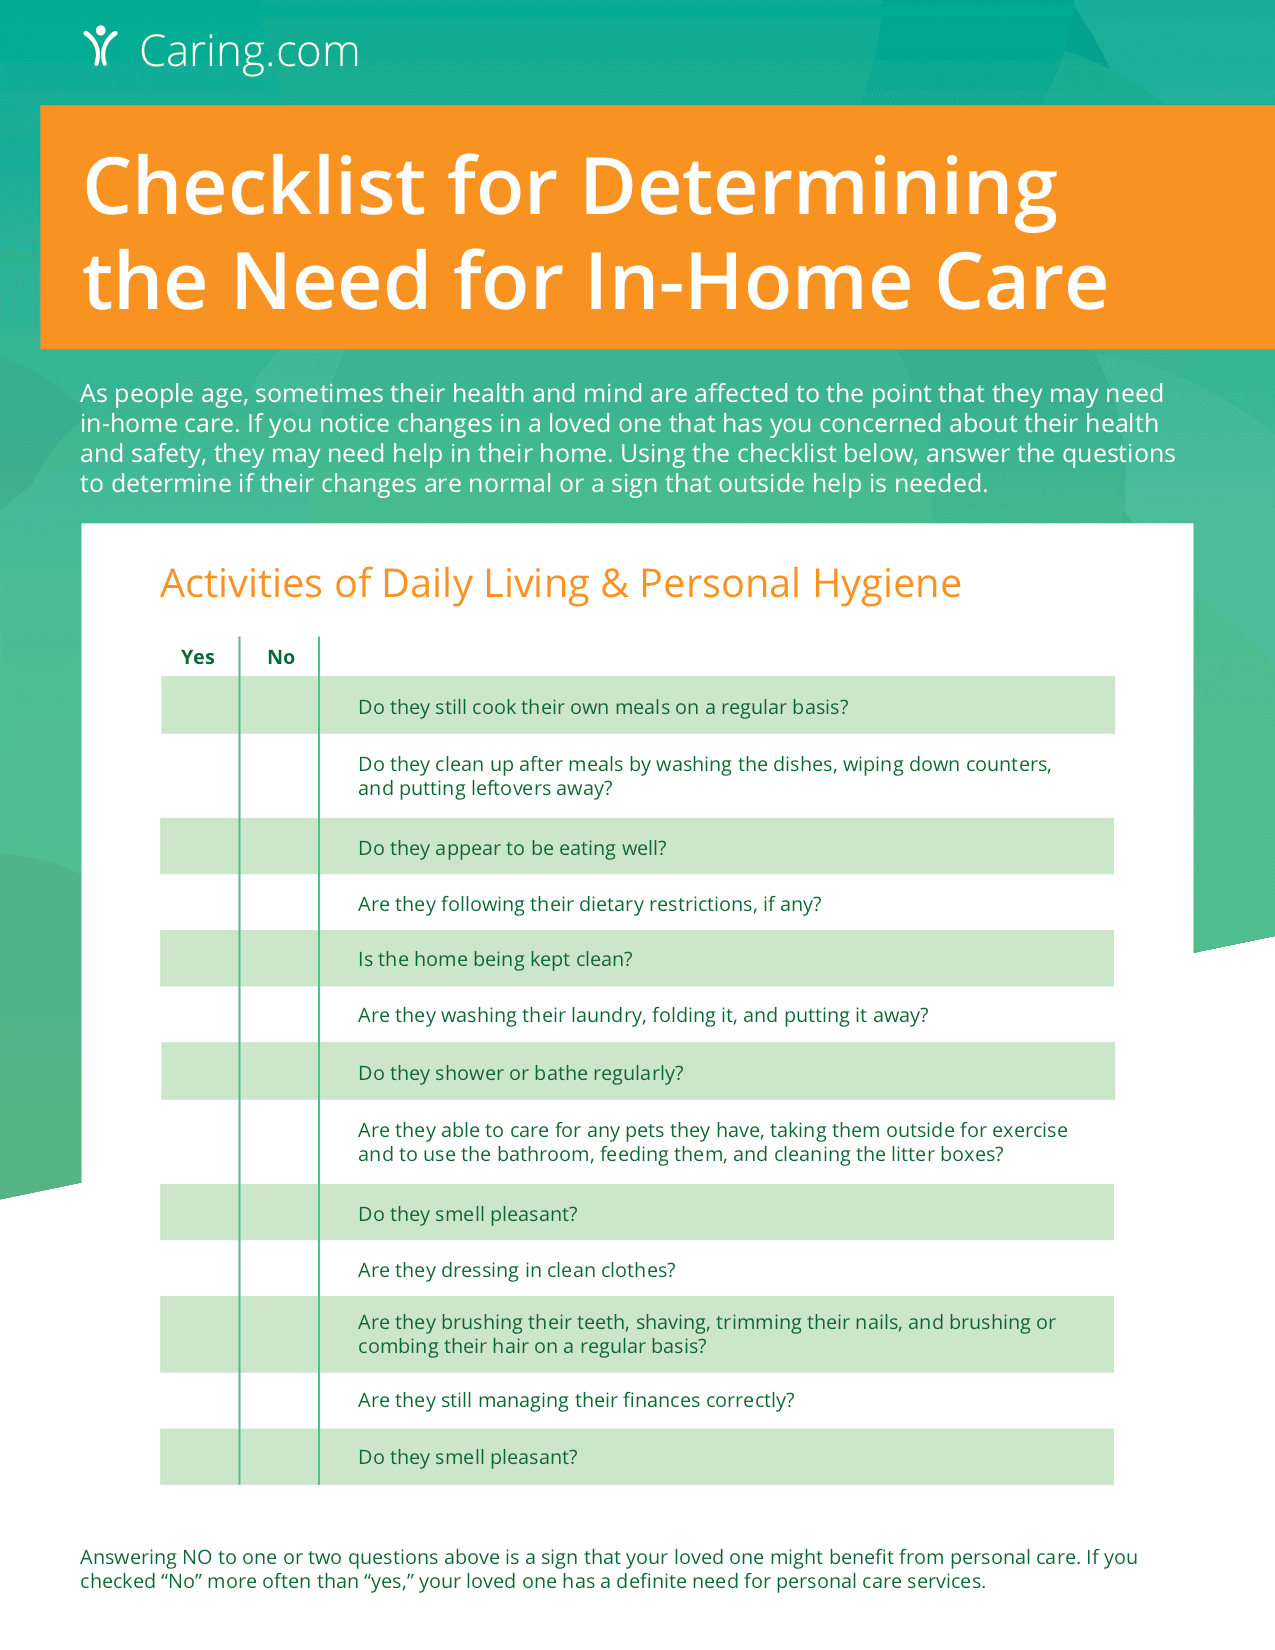 Checklist for determining the need for home care